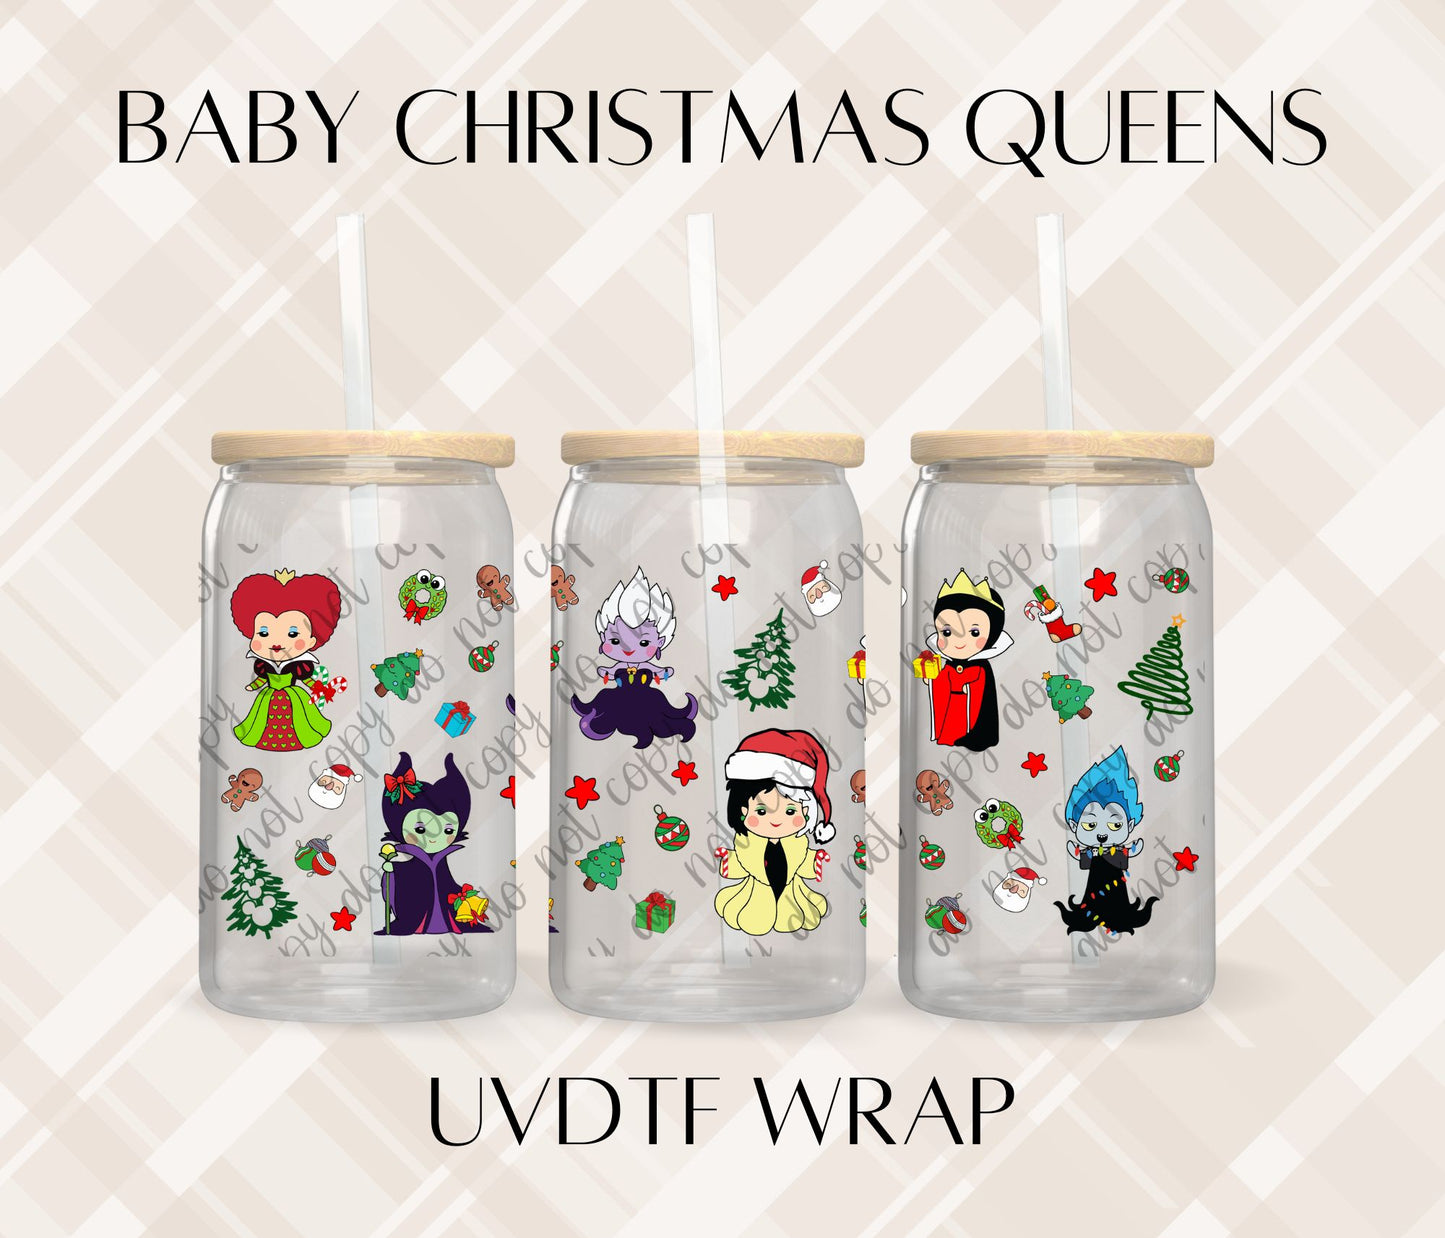 BABY CHRISTMAS QUEENS UVDTF WRAP